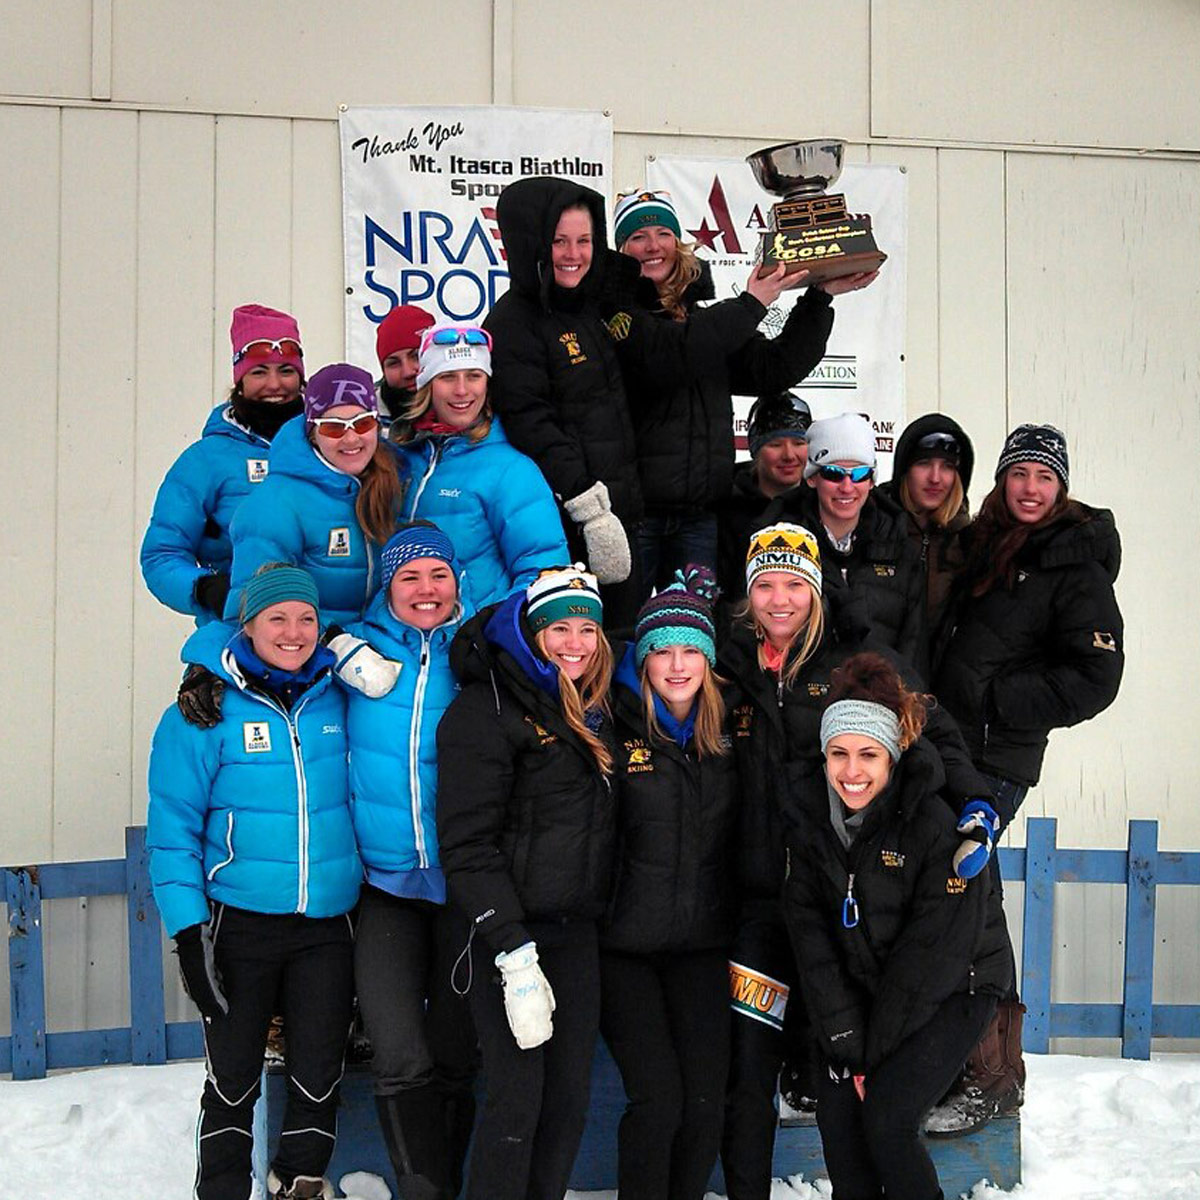 Athletes from NMU, Michigan Tech, and UAF celebrate at the CCSA Regionals. Credit: Jordyn Ross